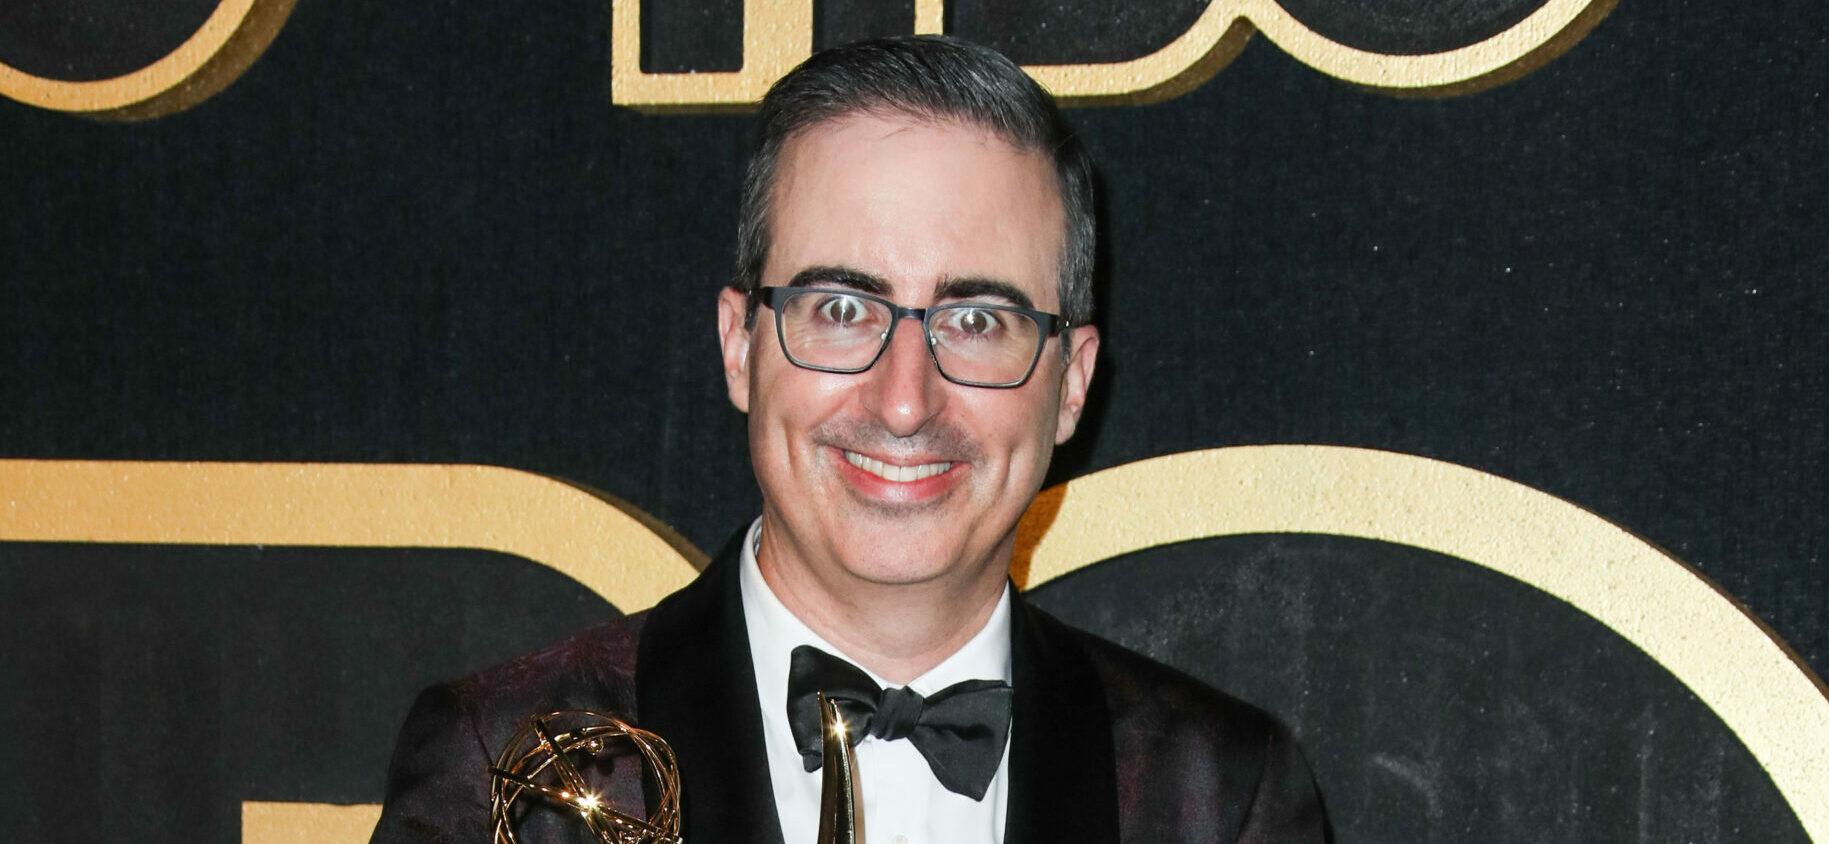 John Oliver arrives for the HBO Emmy party at the Pacific Design Center in Los Angeles, CA